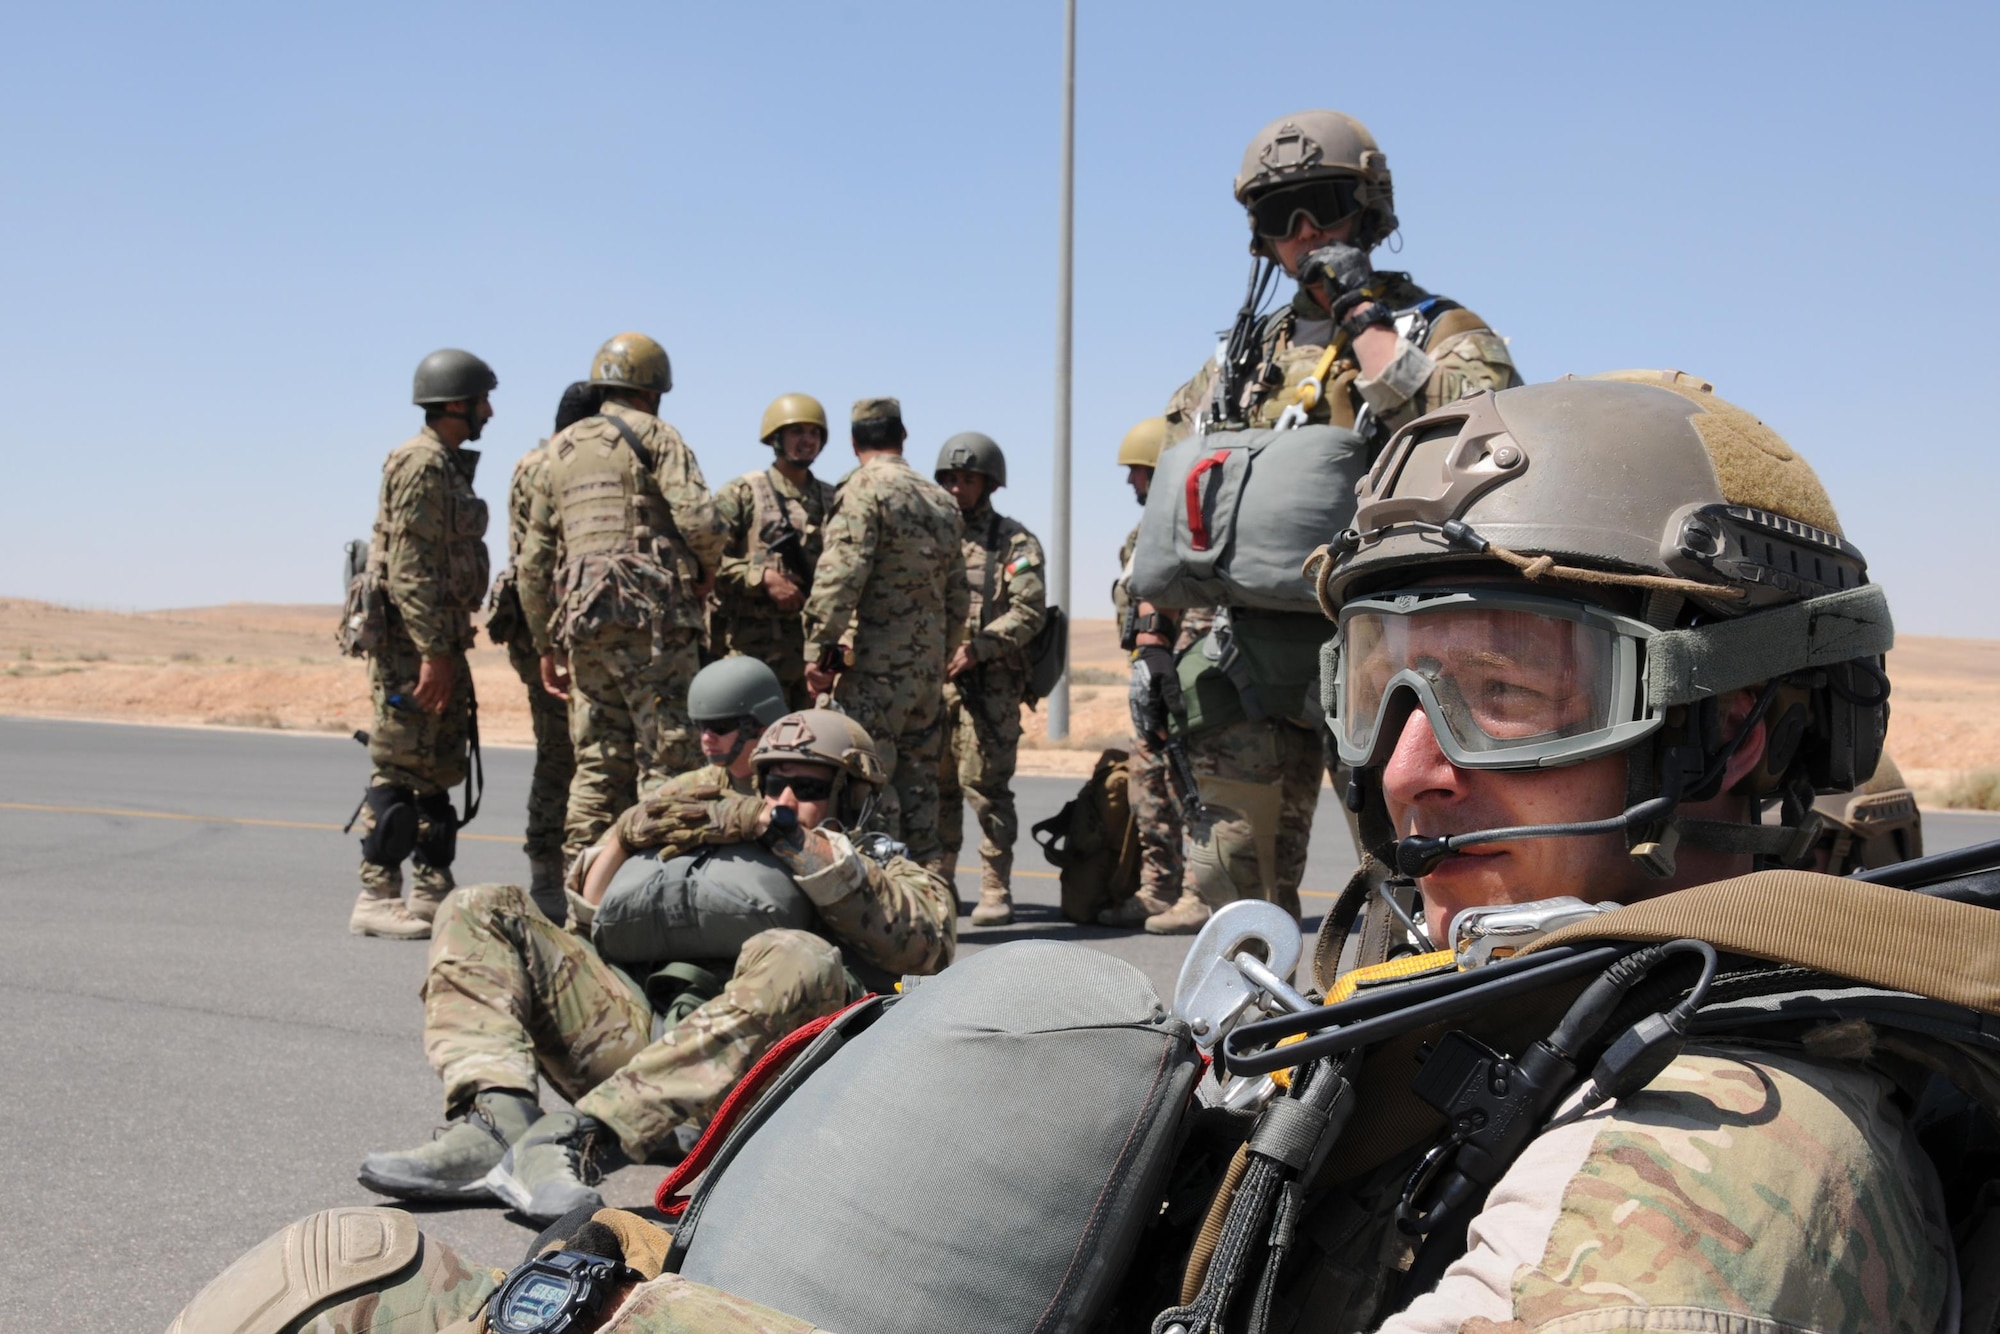 Special Tactics Airmen and Royal Jordanian Armed Forces paratroopers wait to board a 94th Airlift Wing C-130 for an airdrop mission supporting Exercise Eager Lion in Jordan, May 19, 2016. Special Tactics Airmen, the Air Force’s ground special operations force, establish air fields and drop zone for follow-on forces after freefalling in to infiltrate into hostile or austere territory. (U.S. Air Force photo/Staff Sgt. Alan Abernethy)
